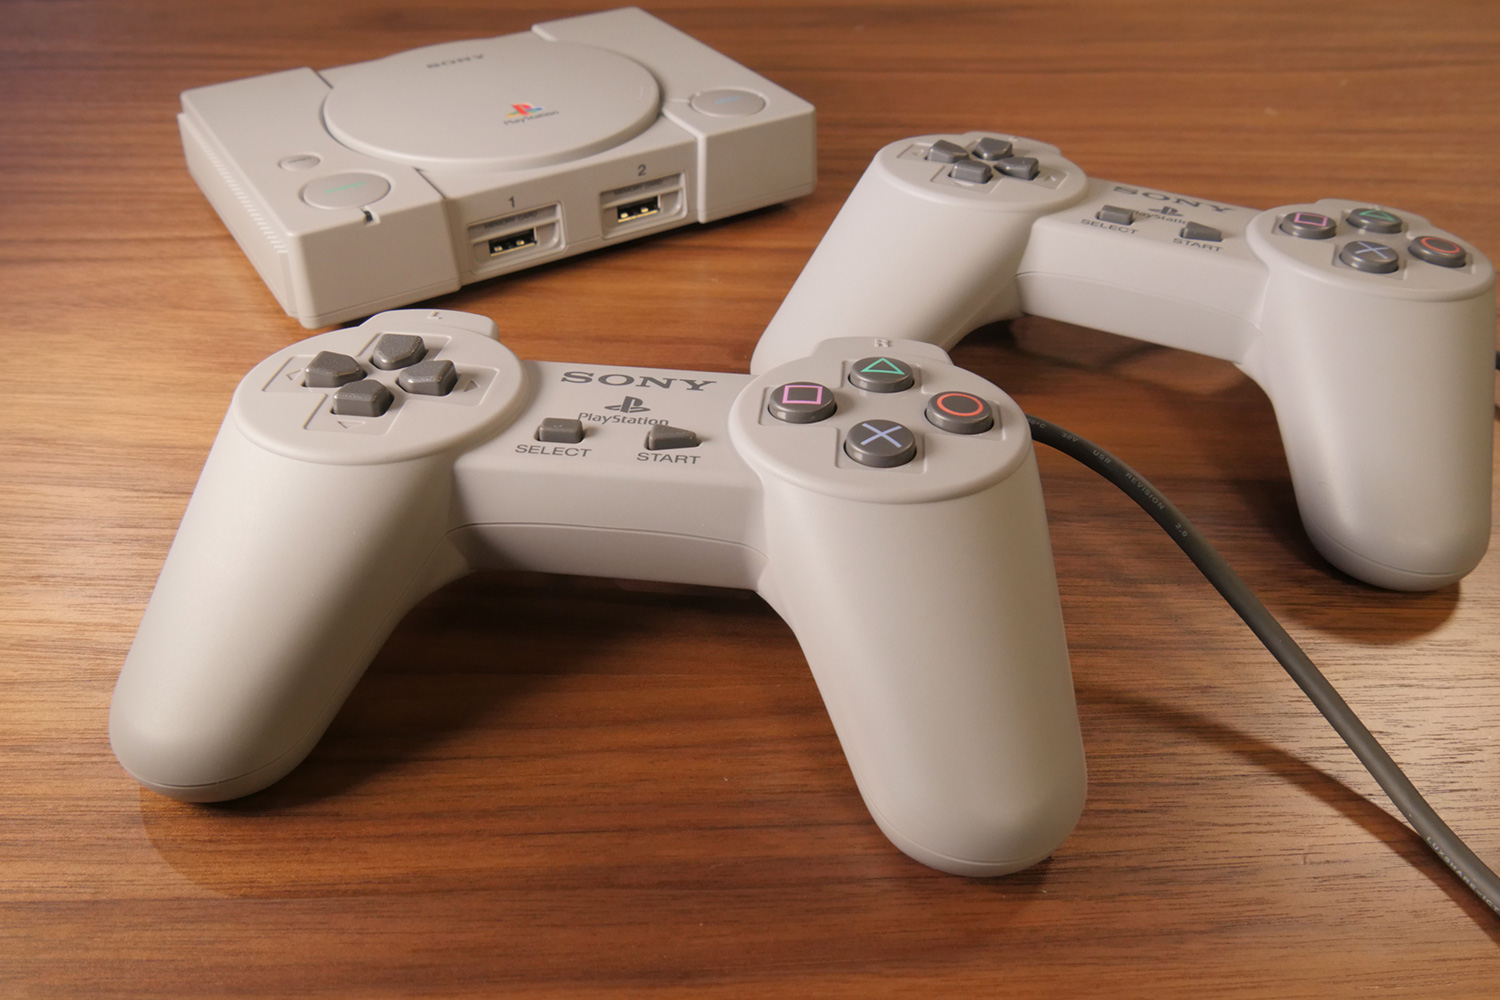 PlayStation Classic Code Mentions Dozens of Popular Games